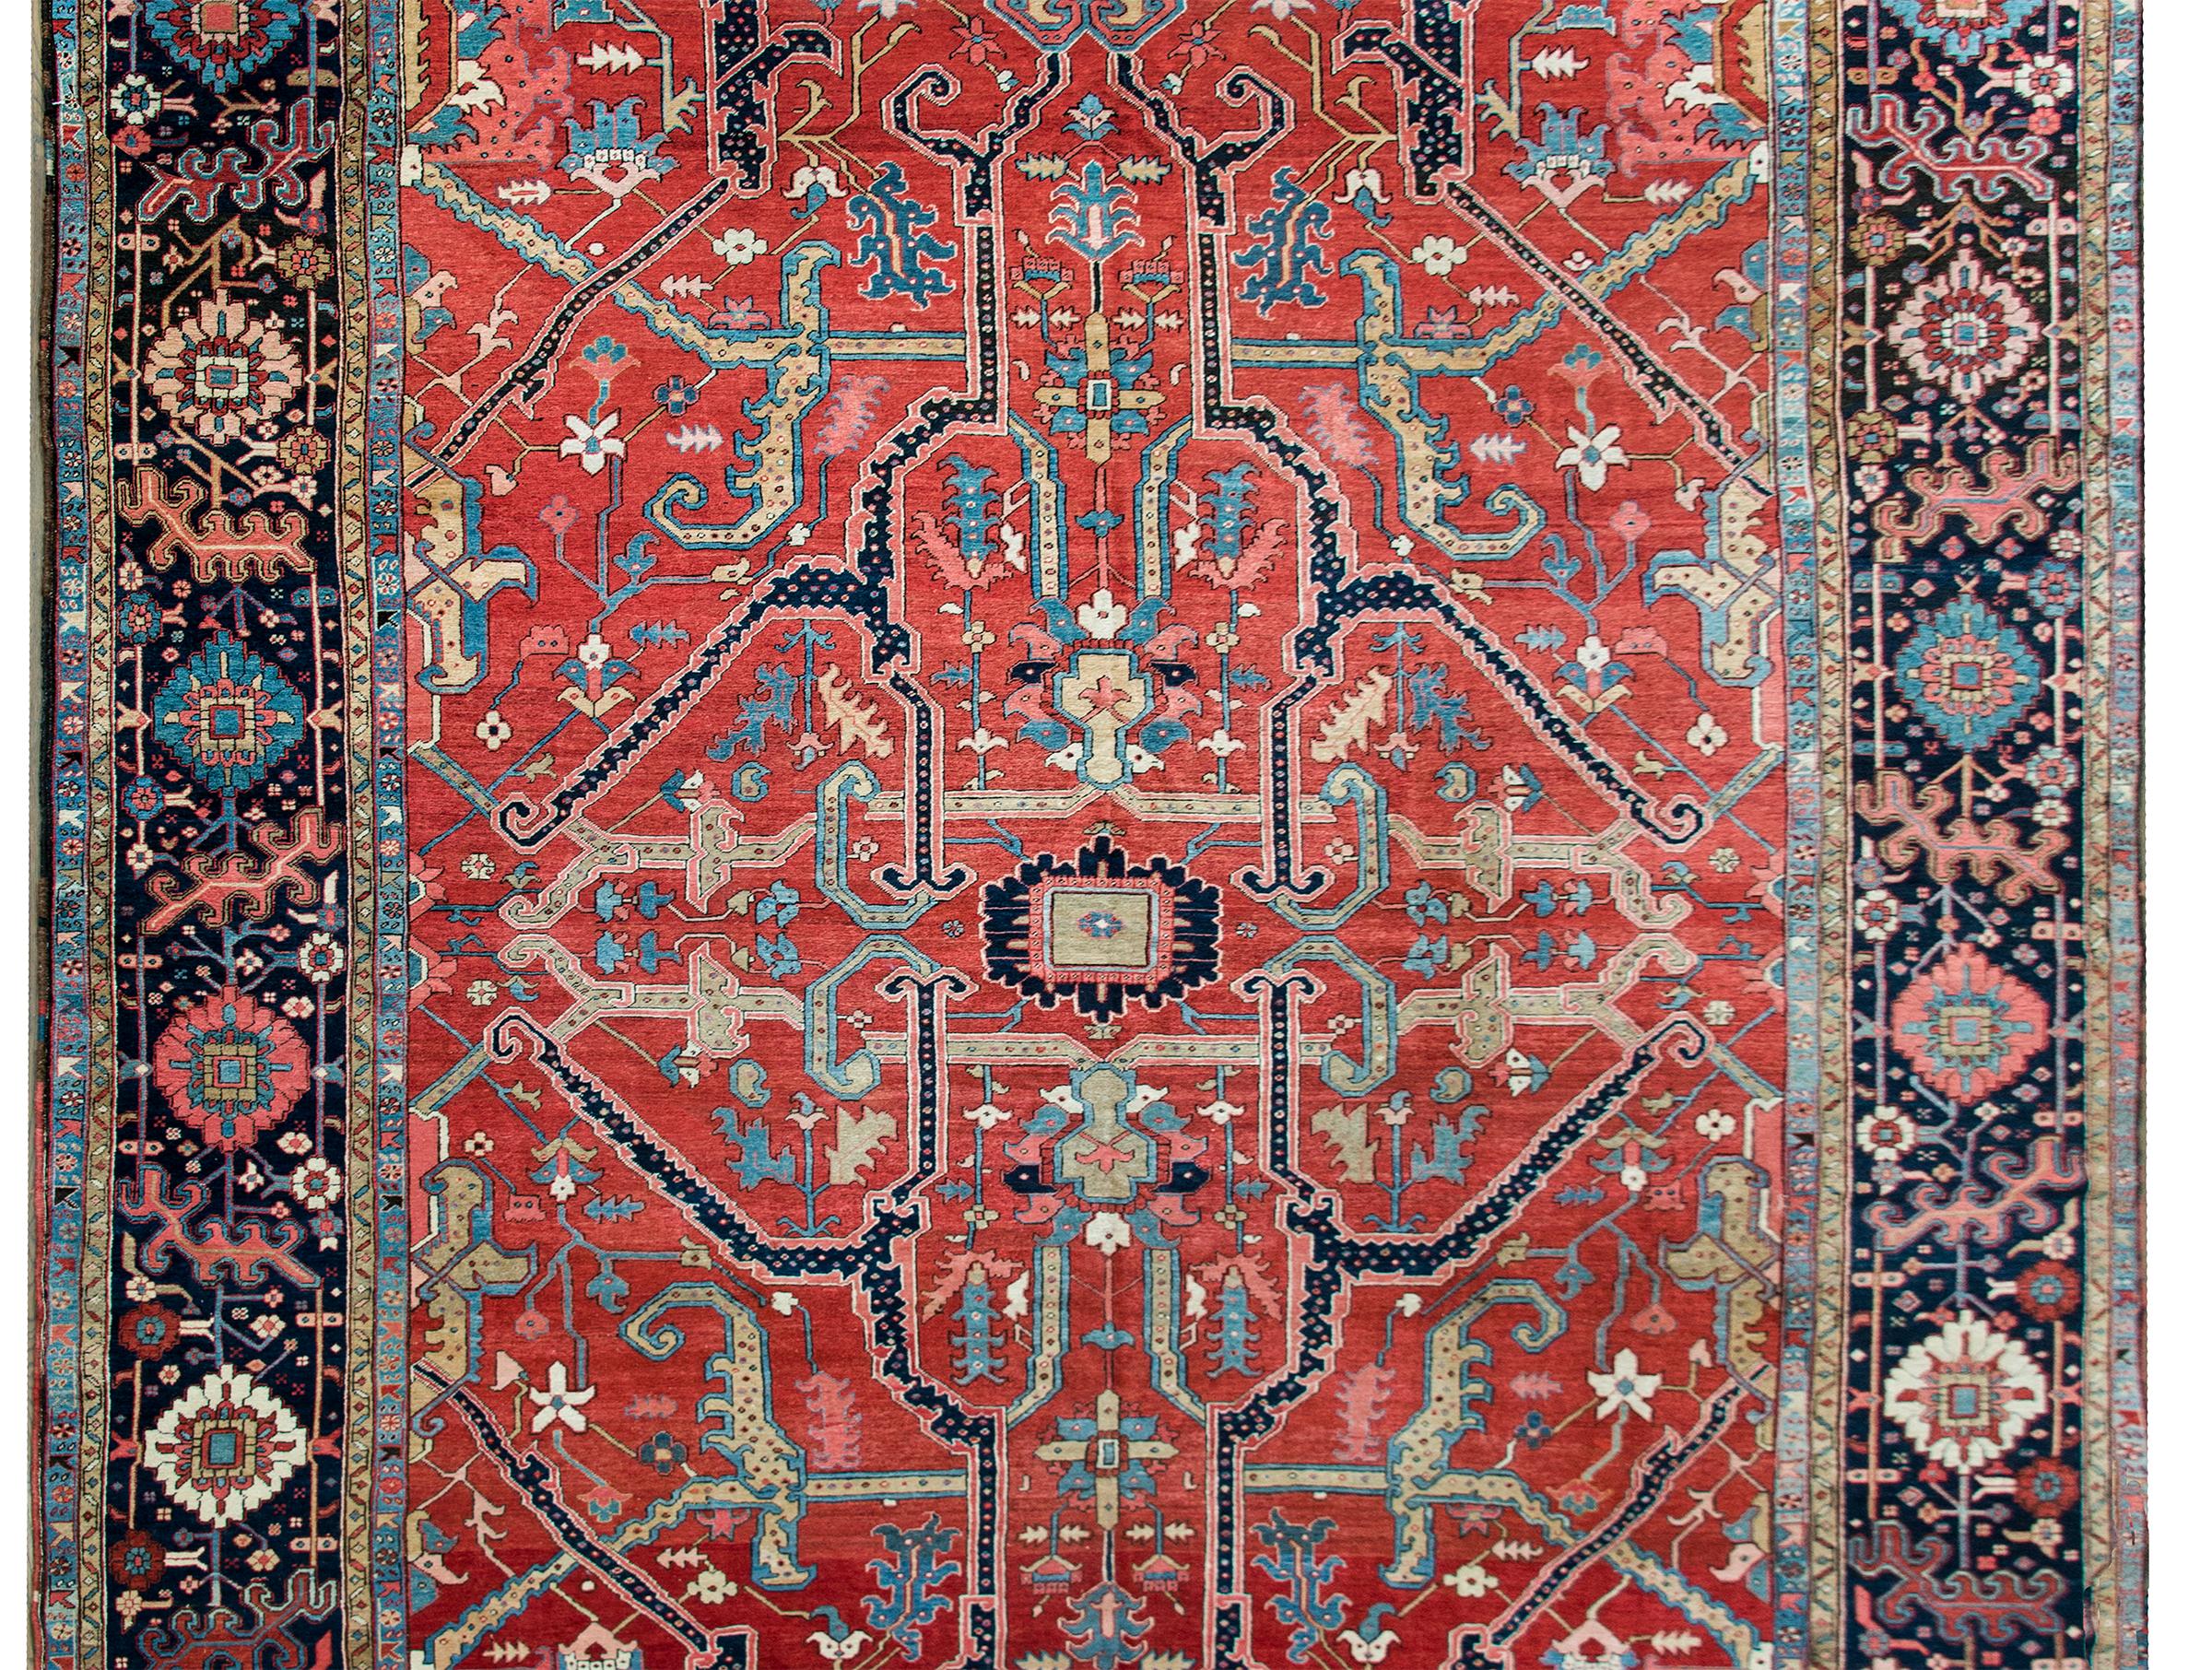 An unbelievably beautiful and rare late 19th century Persian Serapi rug with one of the most beautiful patterns we've ever seen in this style rug. A small central floral medallion is surrounded by stylized swirling and scrolling vines and woven in